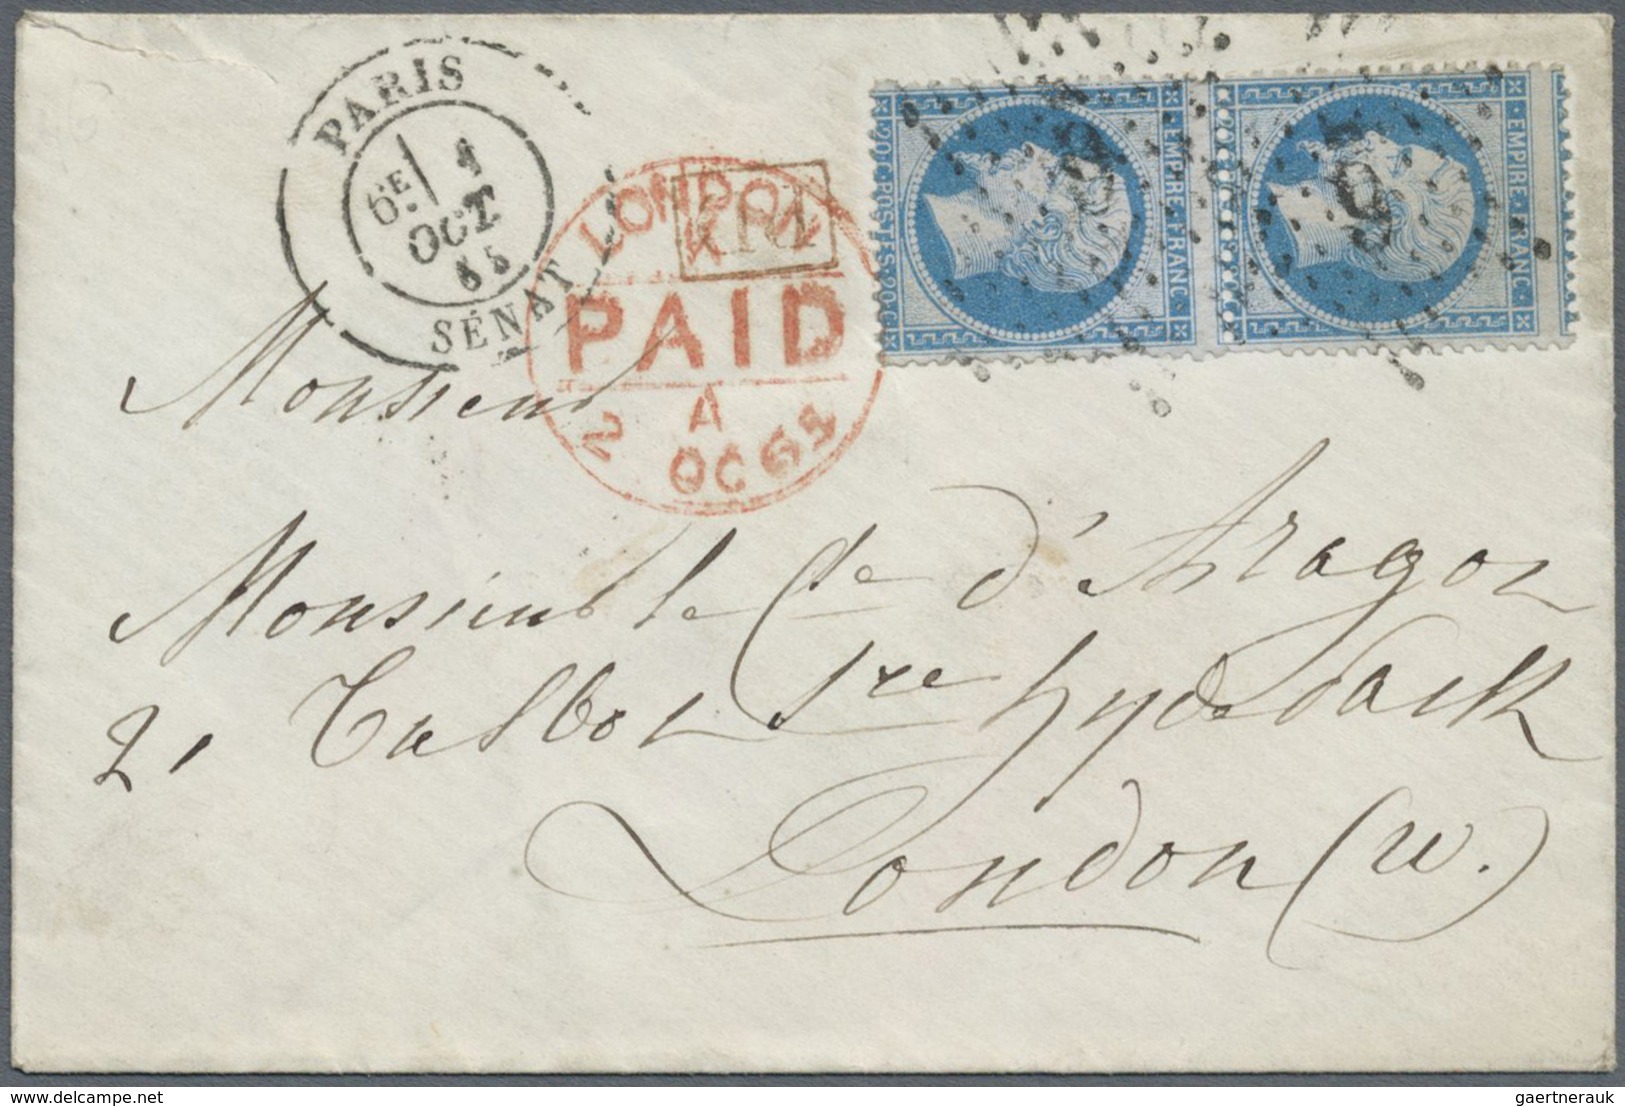 Br Frankreich - Stempel: 1856/1875, ETOILE/ETOILE AVEC NUMERO, group of apprx. 56 entires with franking